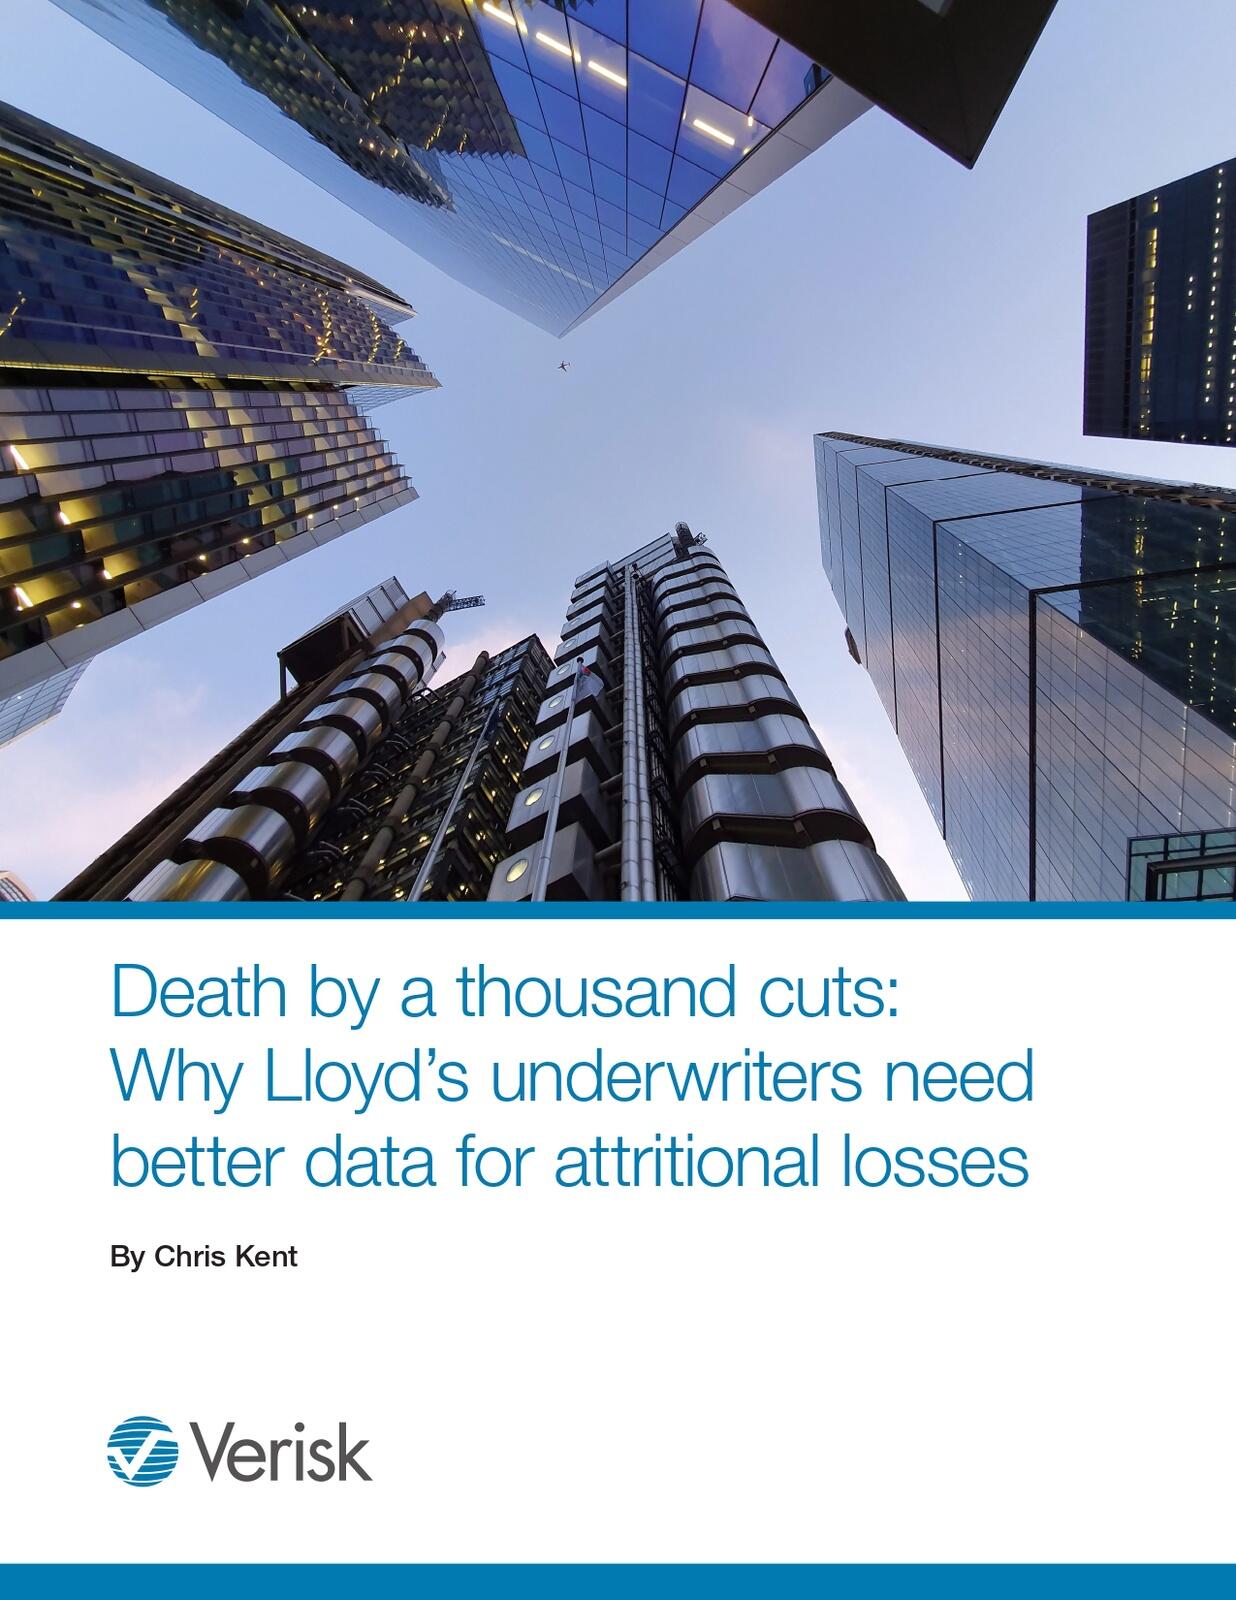 Do Lloyd's syndicates need better data for attritional losses